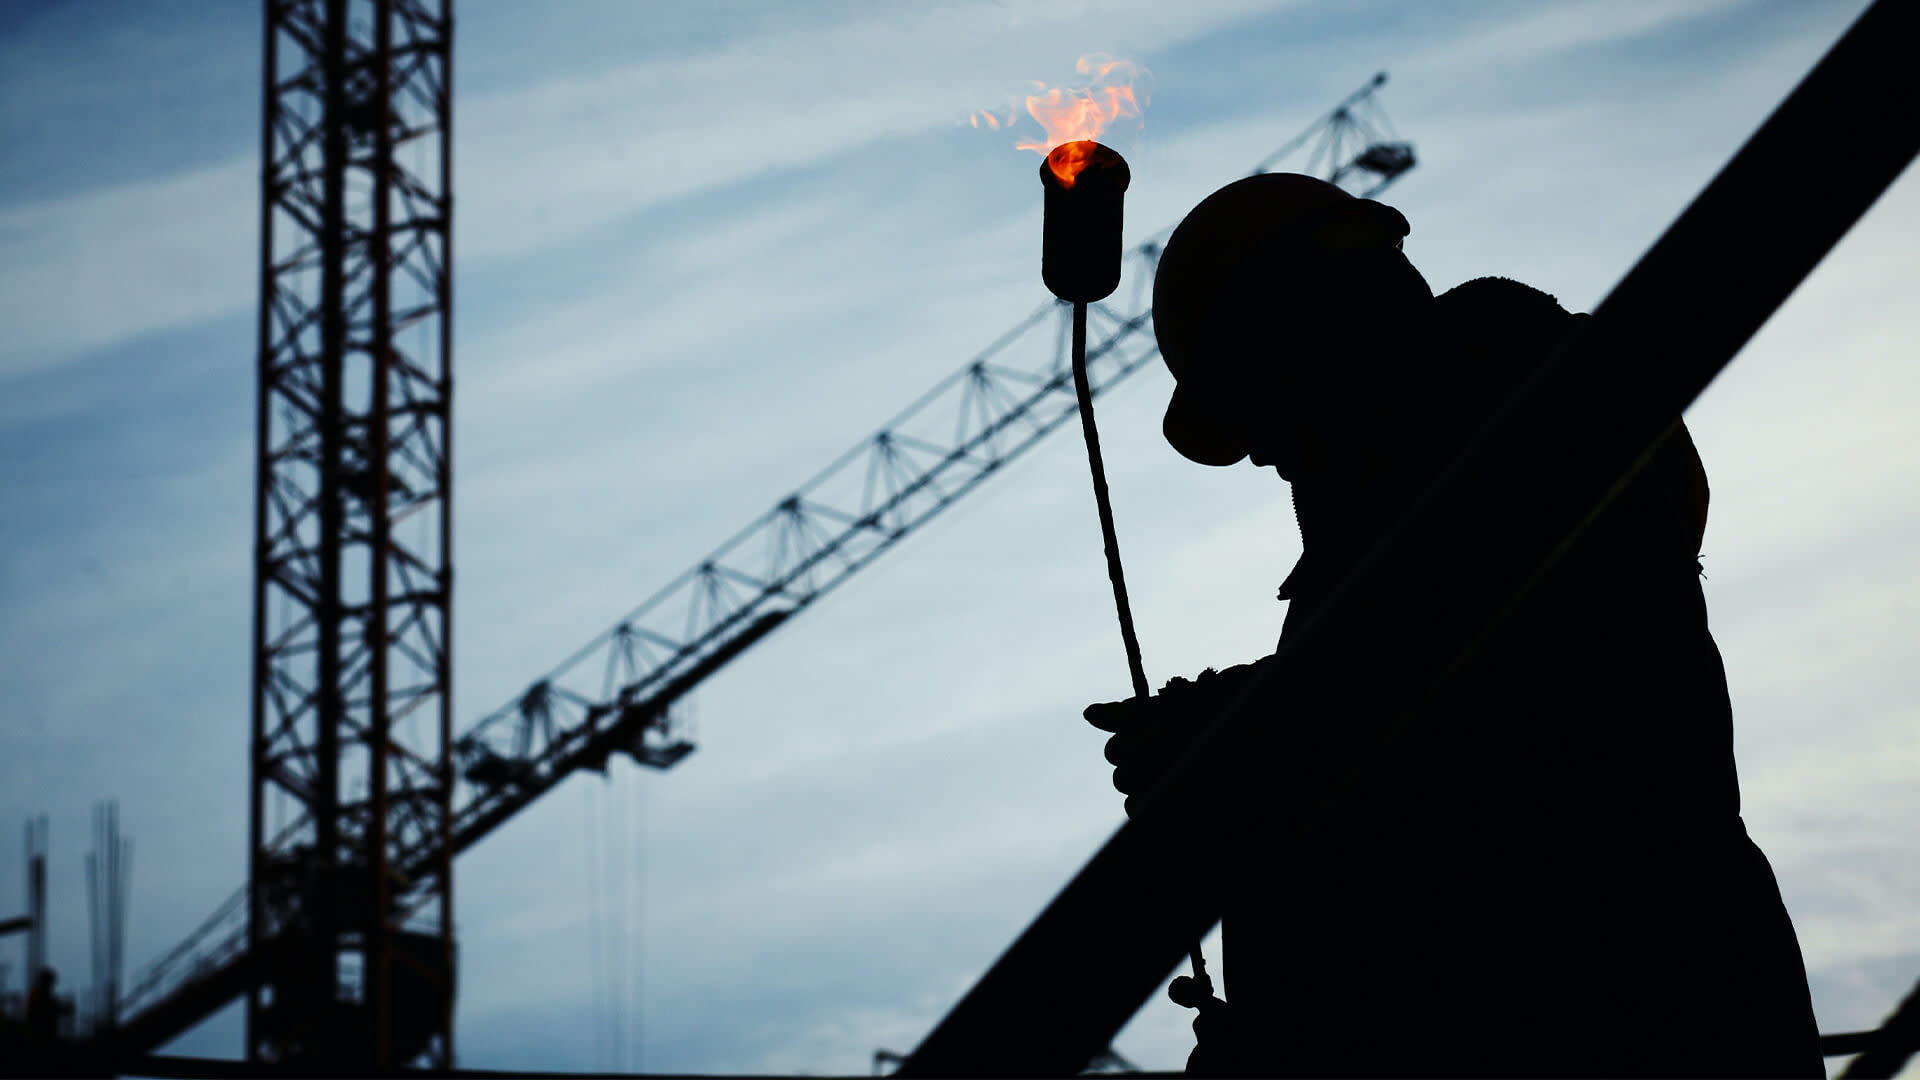 An image showing a construction employee on site during the construction labour shortage in ANZ